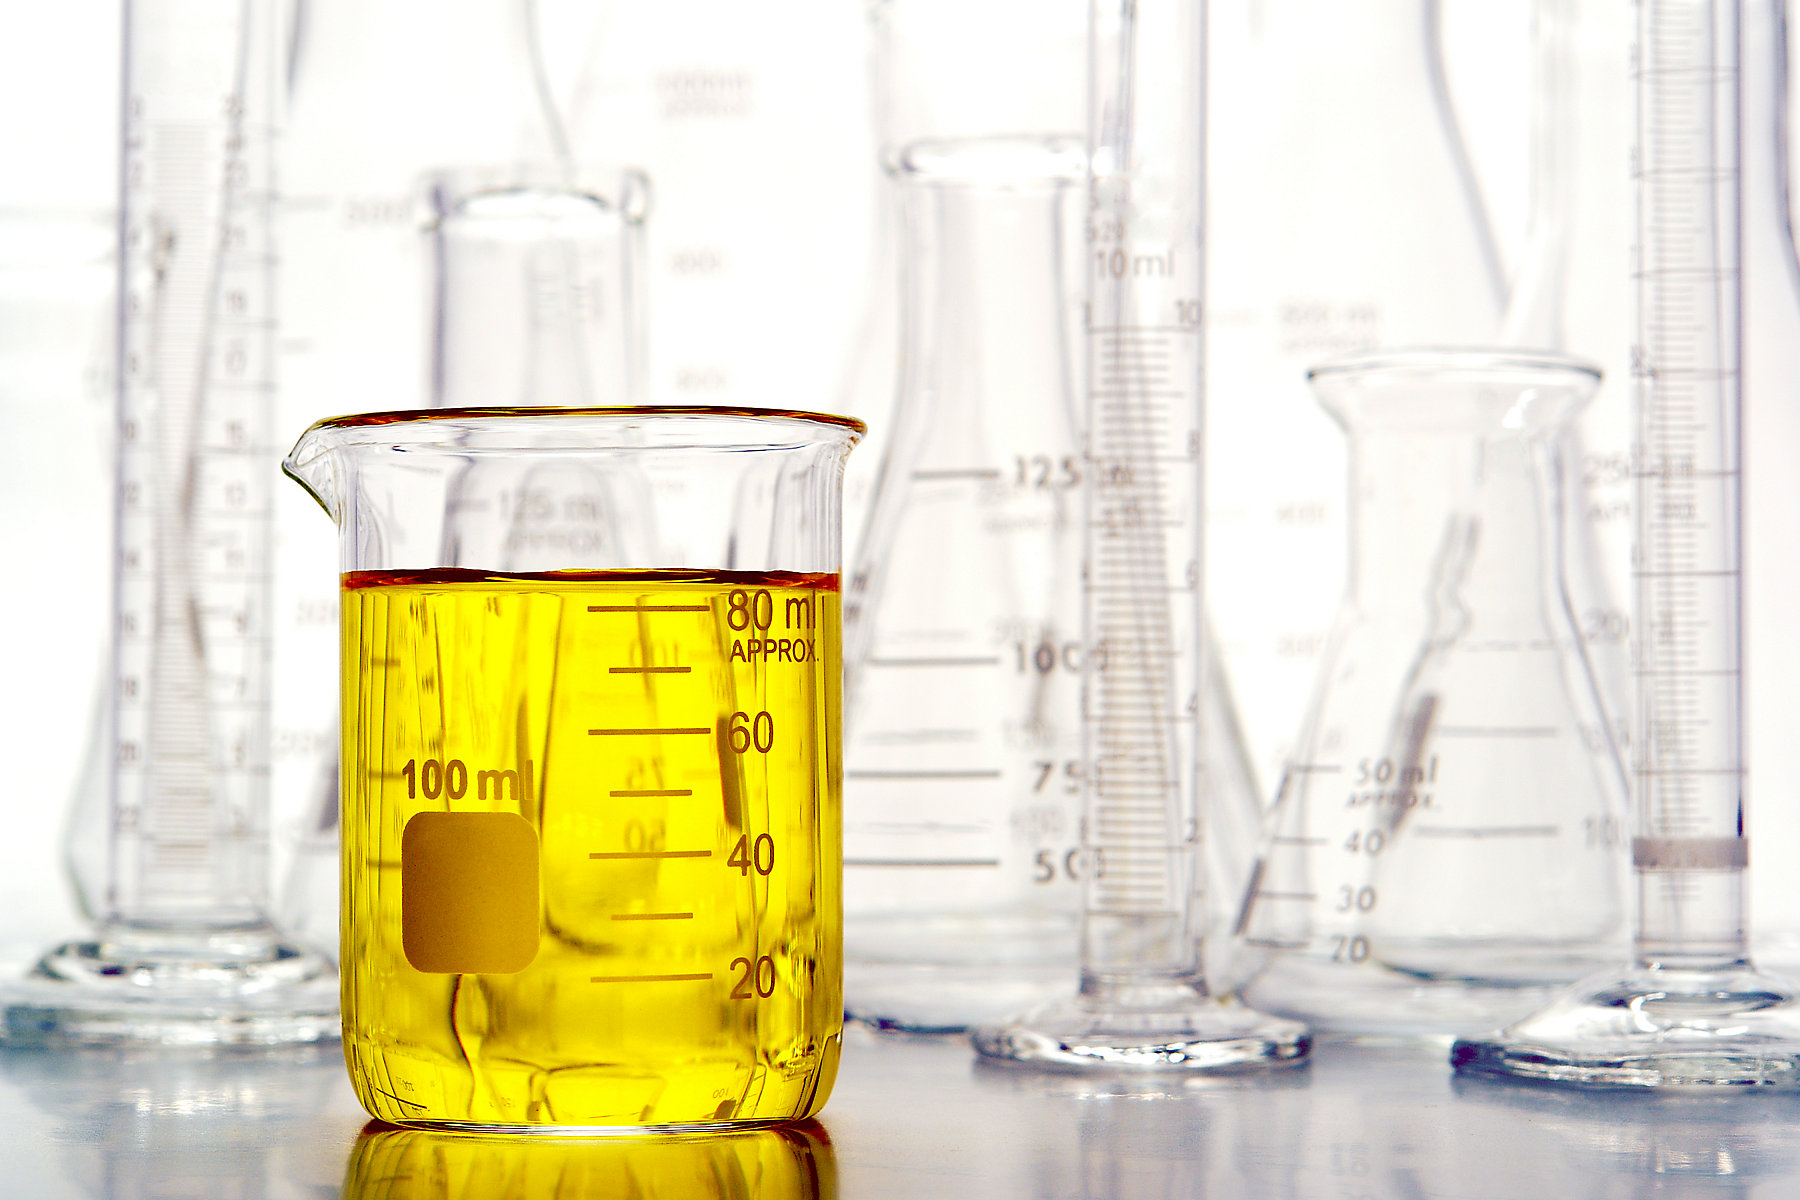 Graduated beaker filled with yellow liquid and laboratory glassware for an experiment in a science research lab